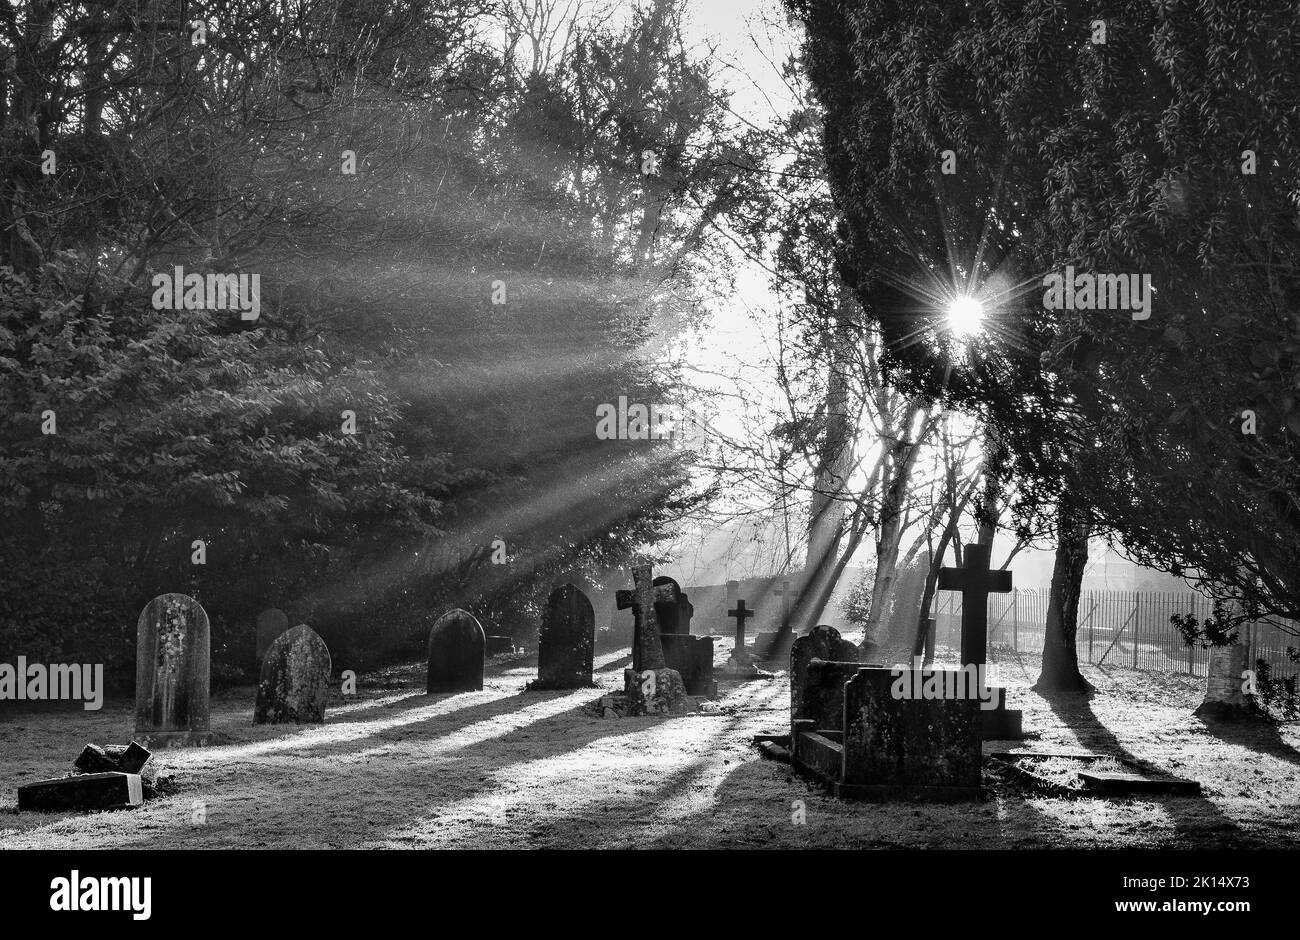 Cemetery/Graveyard at a misty dawn, Llandaff Cathedral, Wales Stock Photo